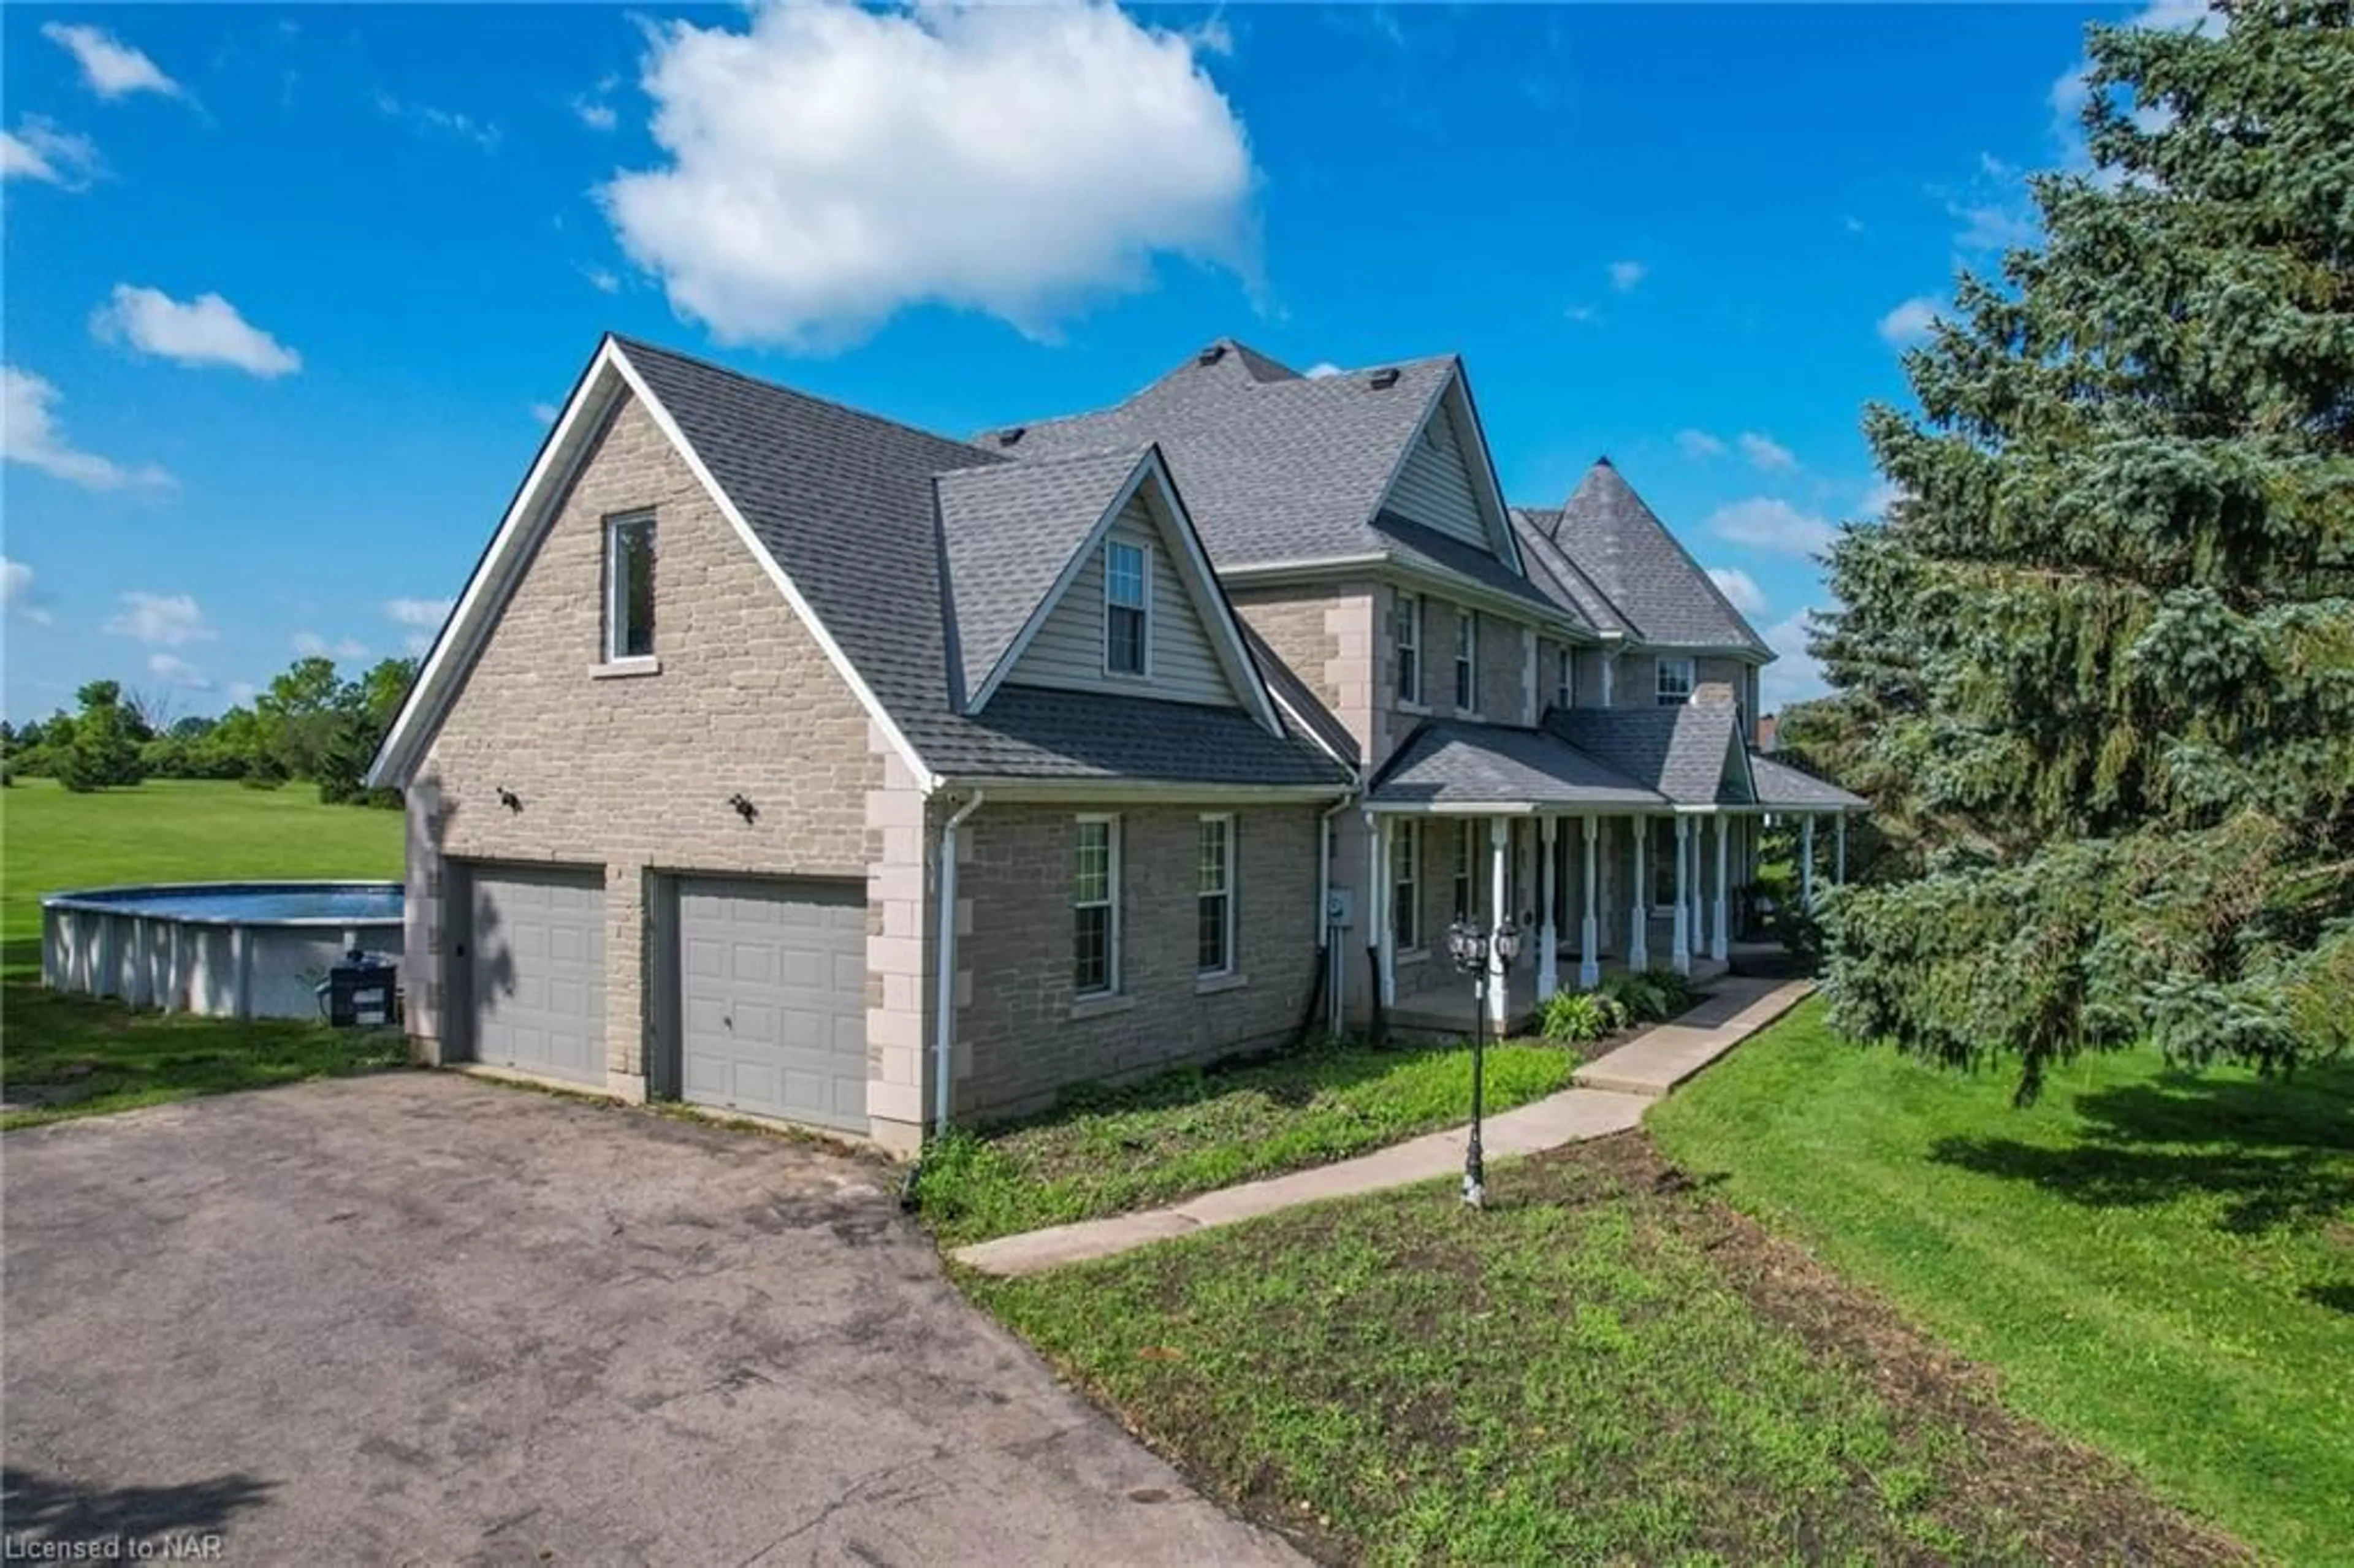 Frontside or backside of a home for 11553 3 Hwy, Wainfleet Ontario L0S 1V0